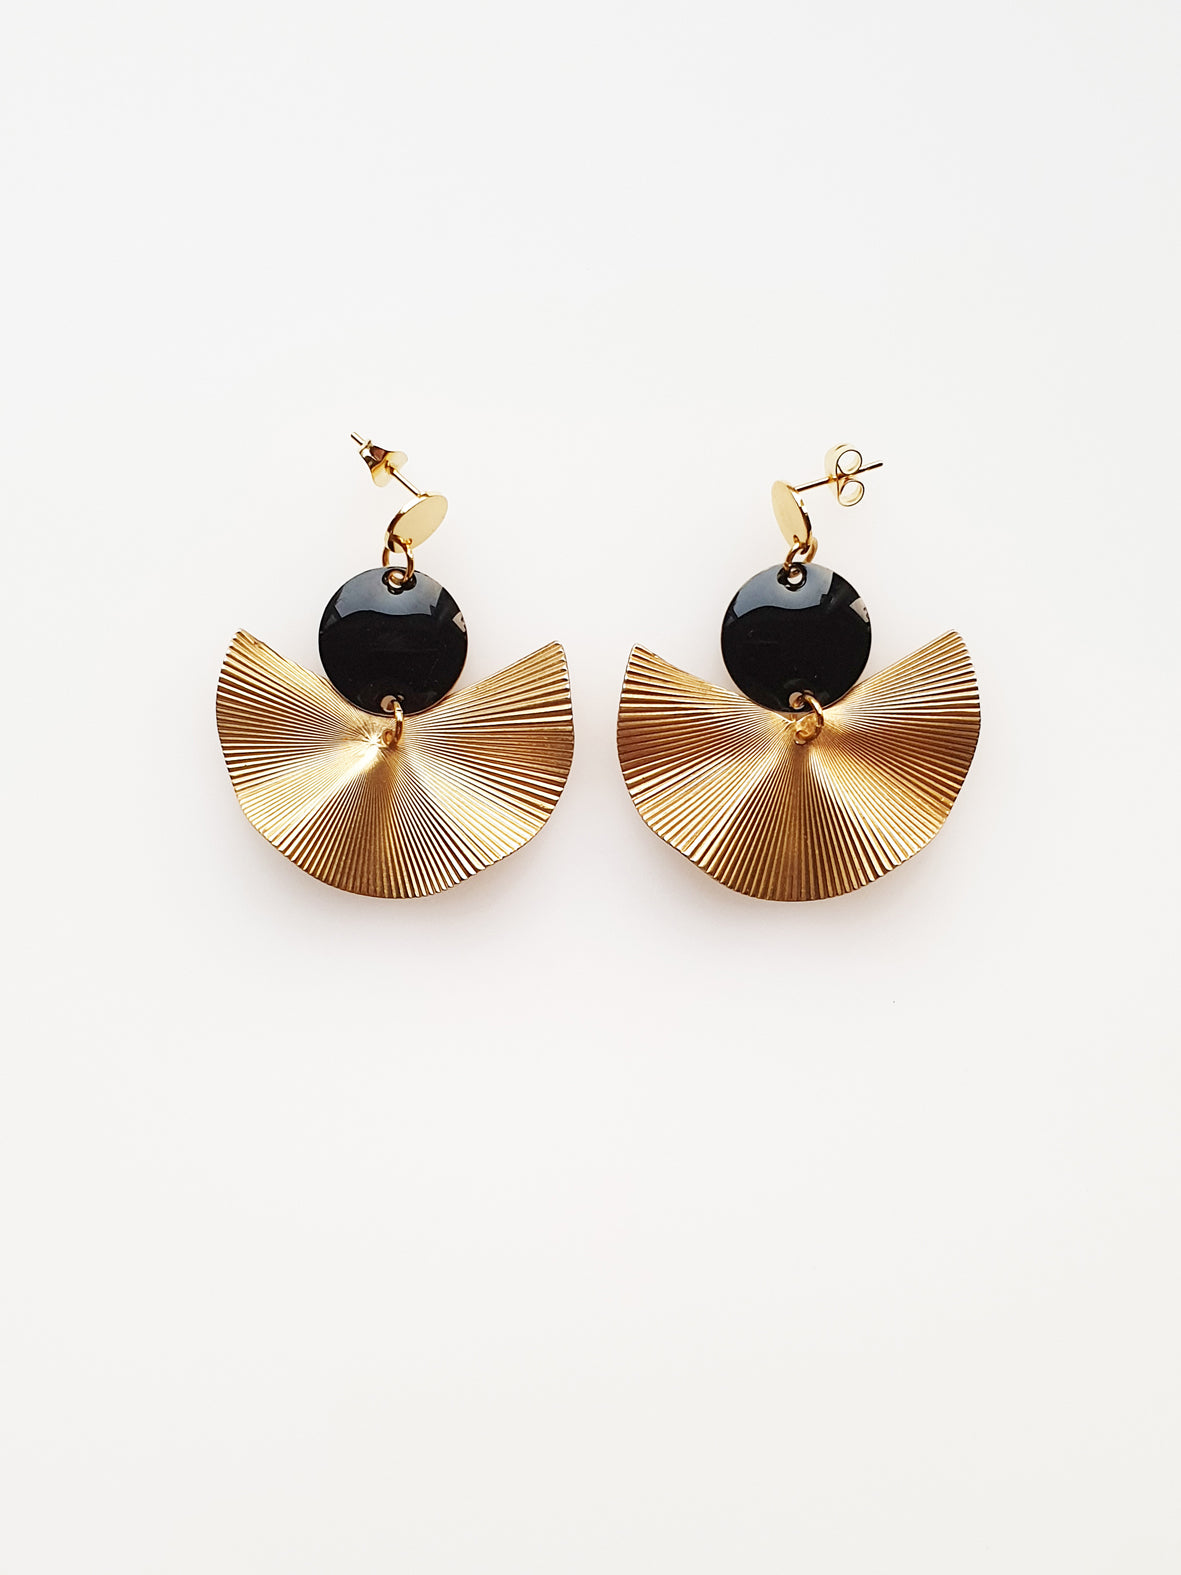 A pair of stud dangle earrings sit against a white background. They feature a black enamel connector dot and a textured brass fan piece.